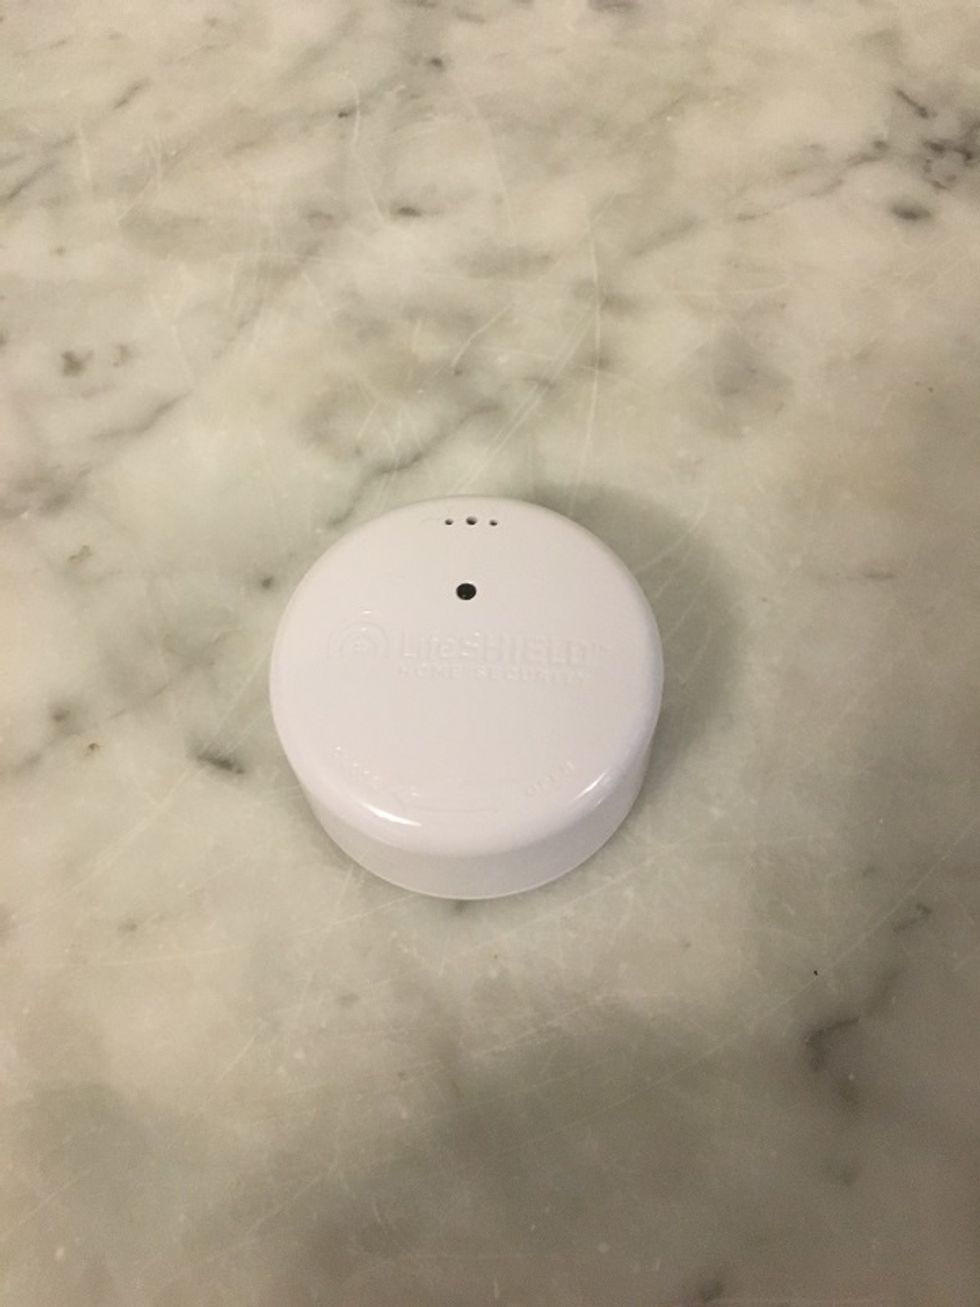 Photo of lifeshield fire safety sensor on a counter.